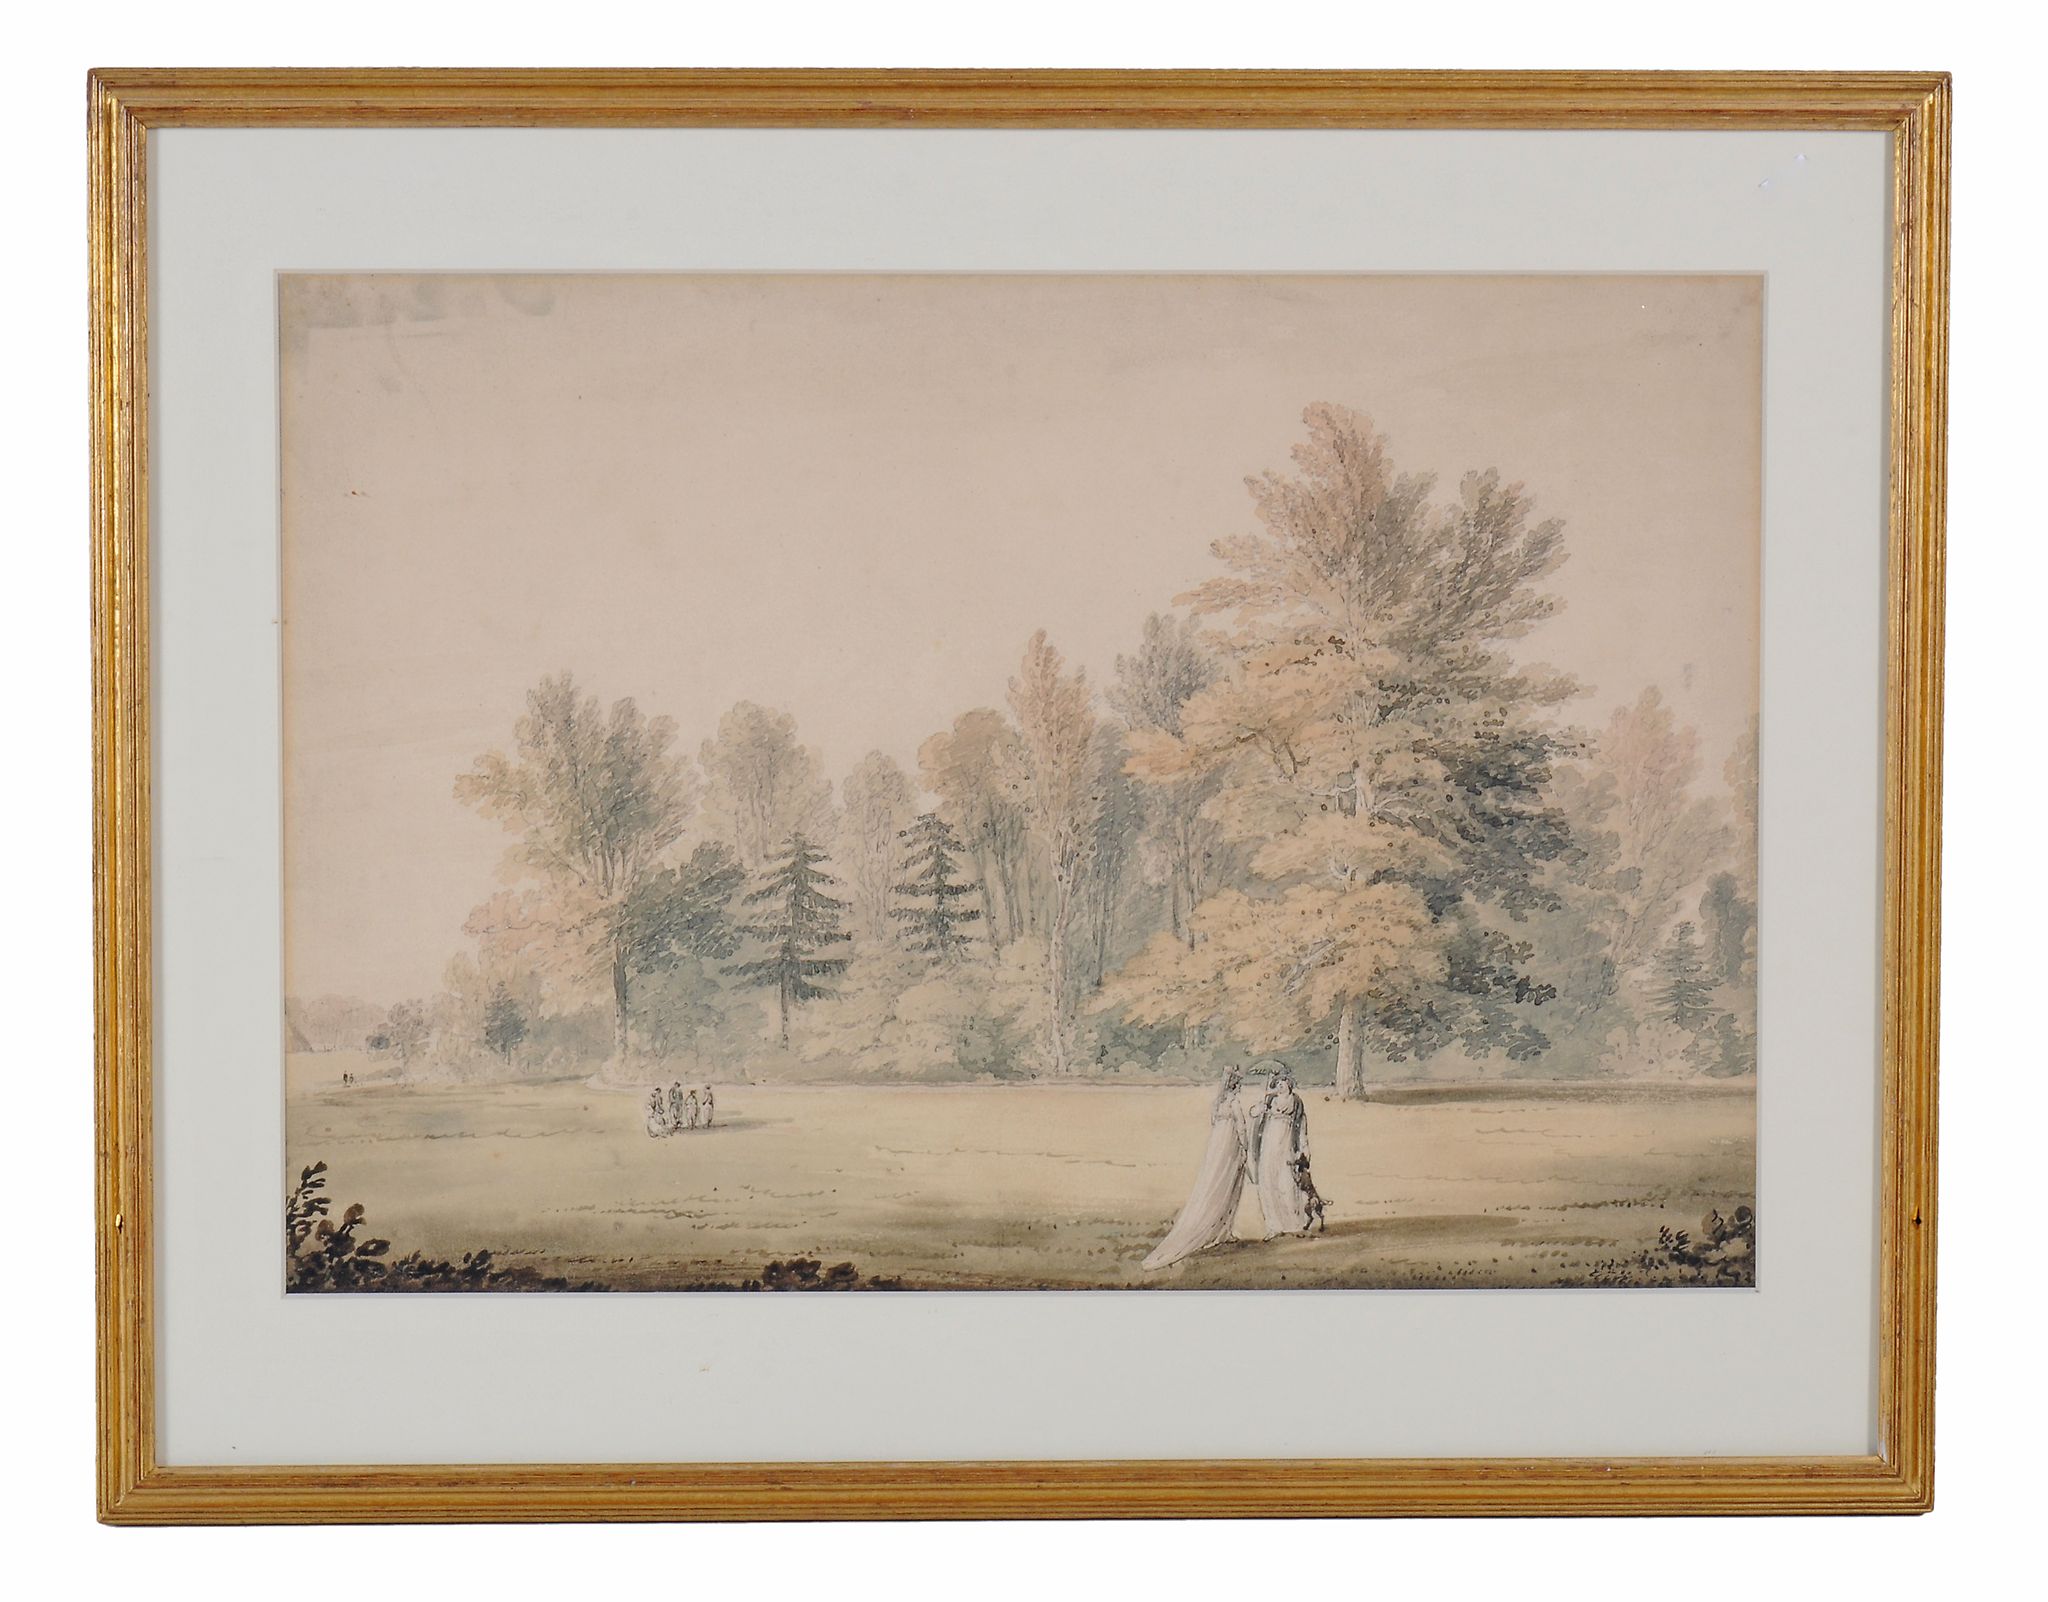 John Claude Nattes (circa 1765-1839) - Figures in a park Watercolour  33 x 47 cm. (13 x 18 1/2 in) - Image 3 of 3